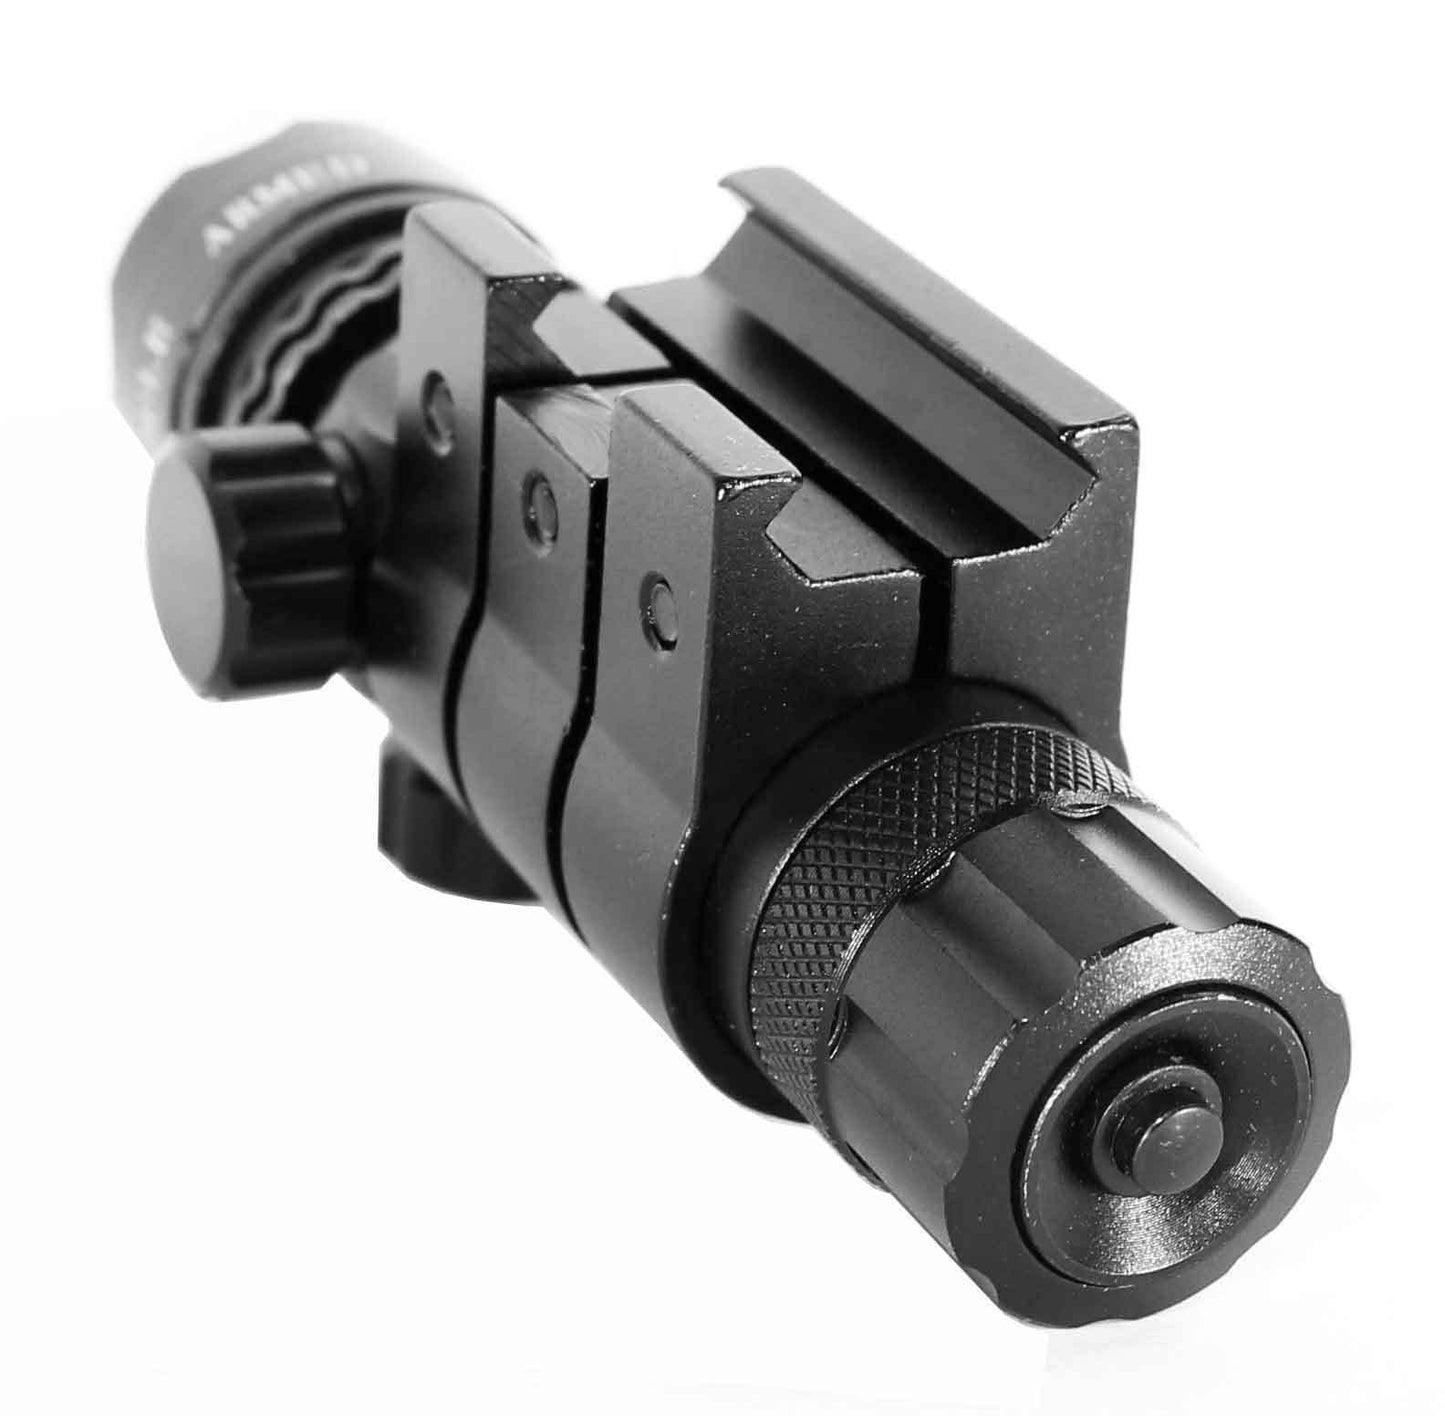 Tactical Green Dot Laser Scope Picatinny Style Compatible With BullPup Panzer Arms BP12.